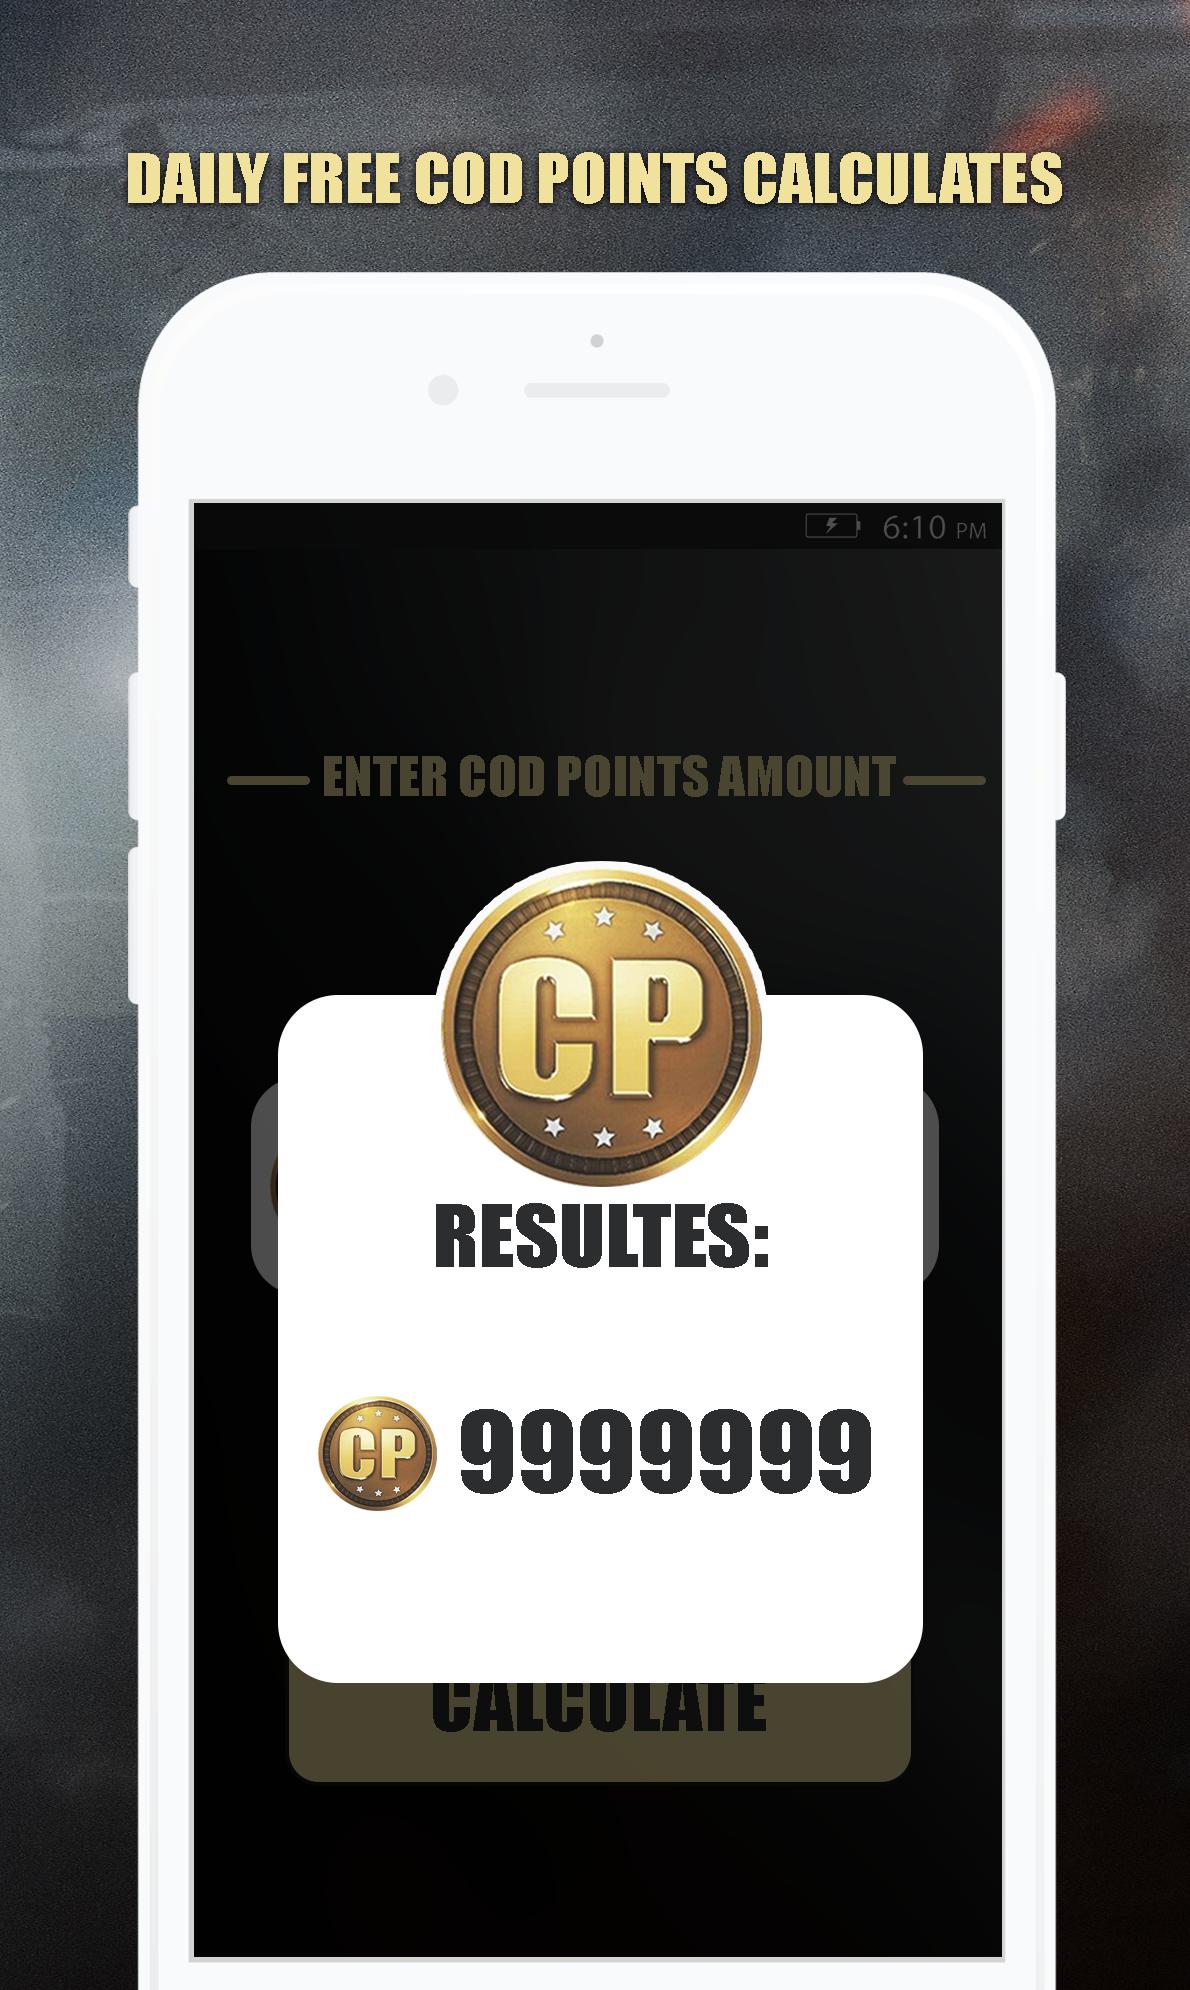 [Unlimited] Free Cod Points & Credits Call Of Duty Mobile Apk Or Data